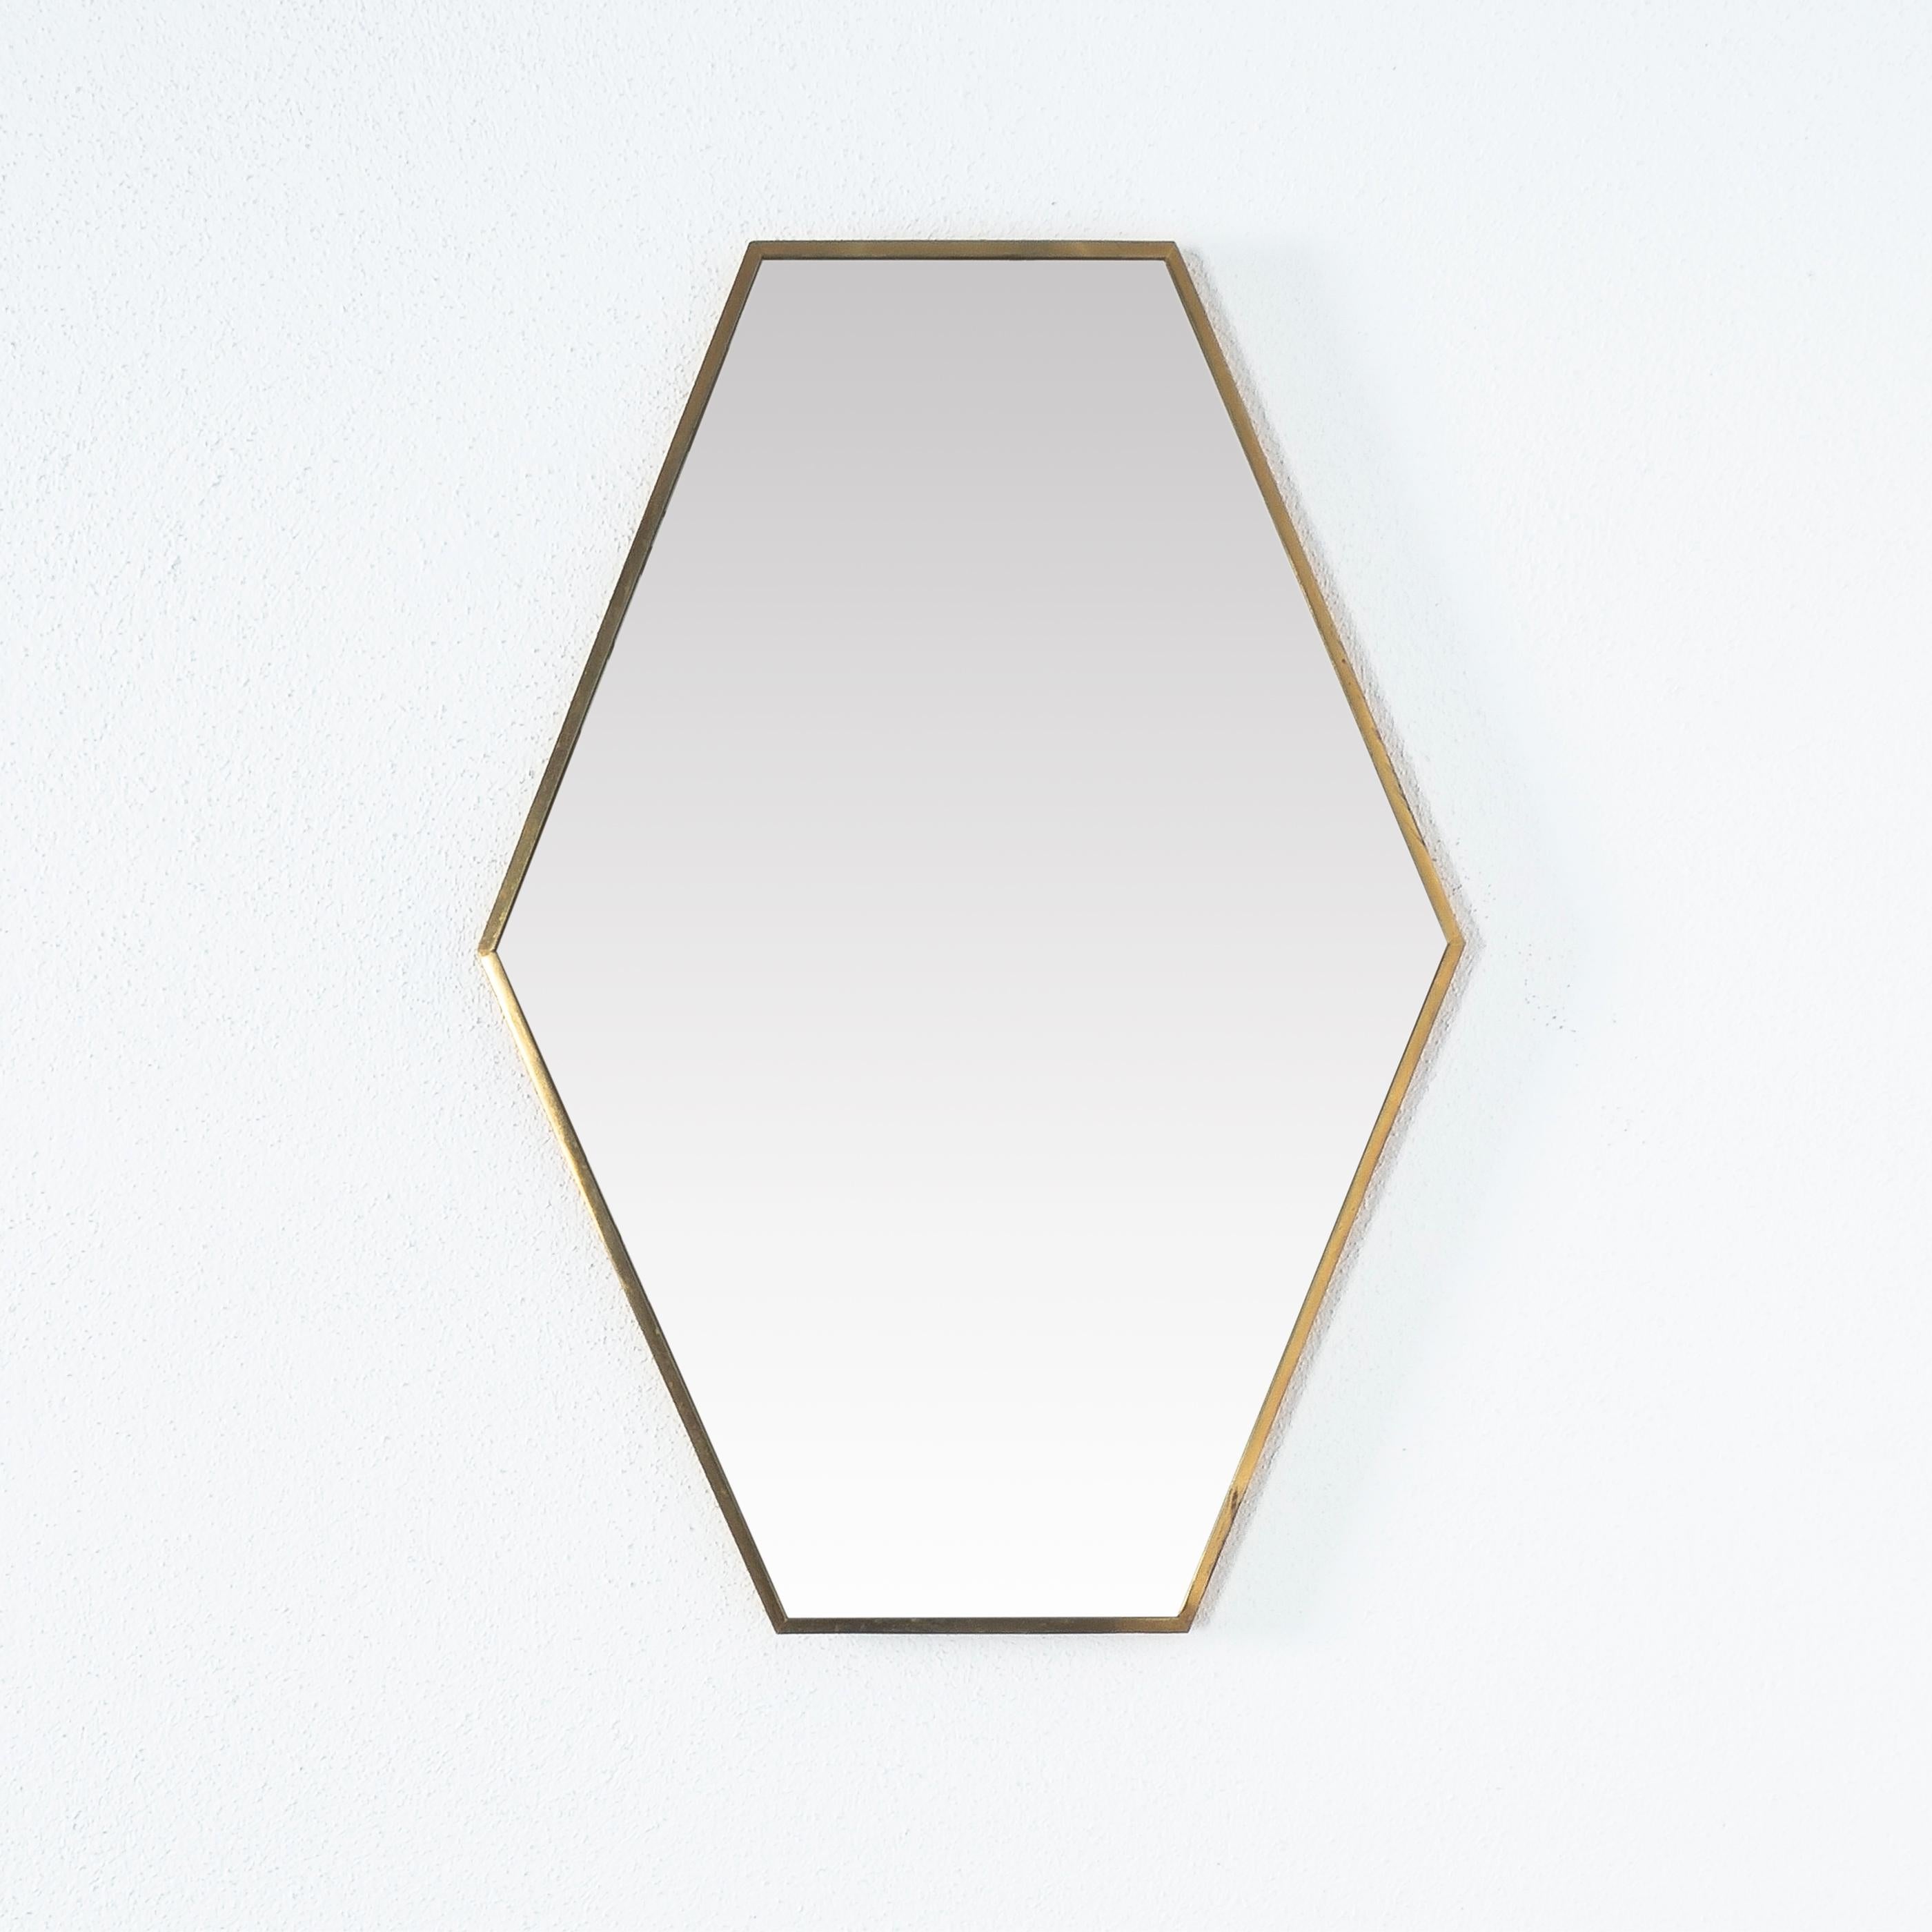 Large brass mirror, Italy, circa 1955

Italian mirror with a slender brass frame and the original mirror glass. It’s in very good condition, the mirror glass shows no staining and hardly any scratches.
Dimensions are: 32.7